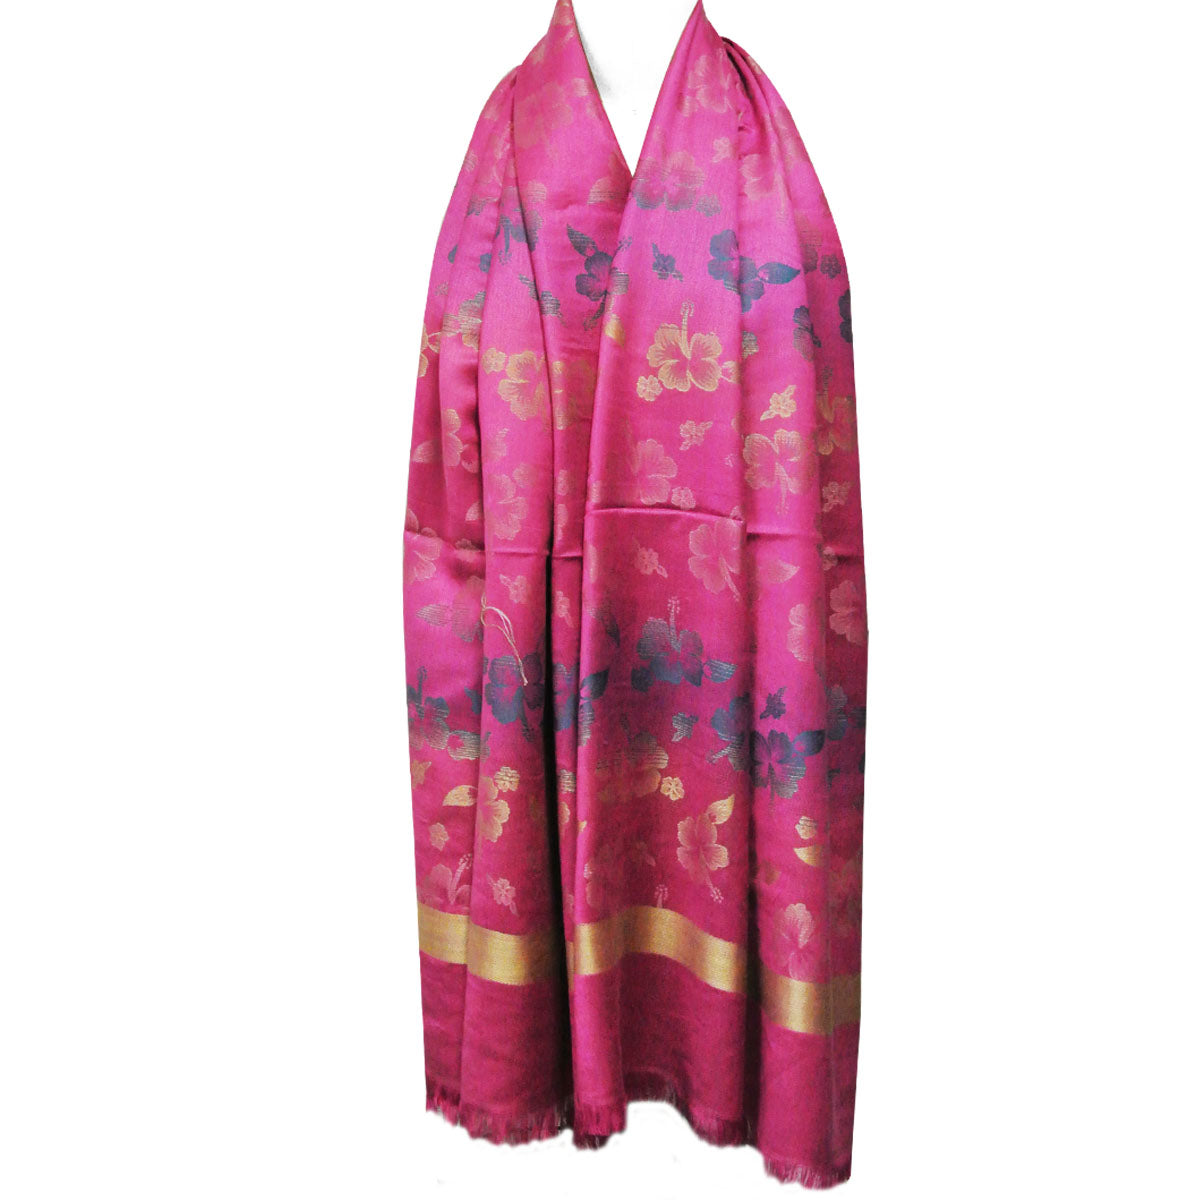 Wrapables Jacquard Woven Floral Clover Scarf Wrap